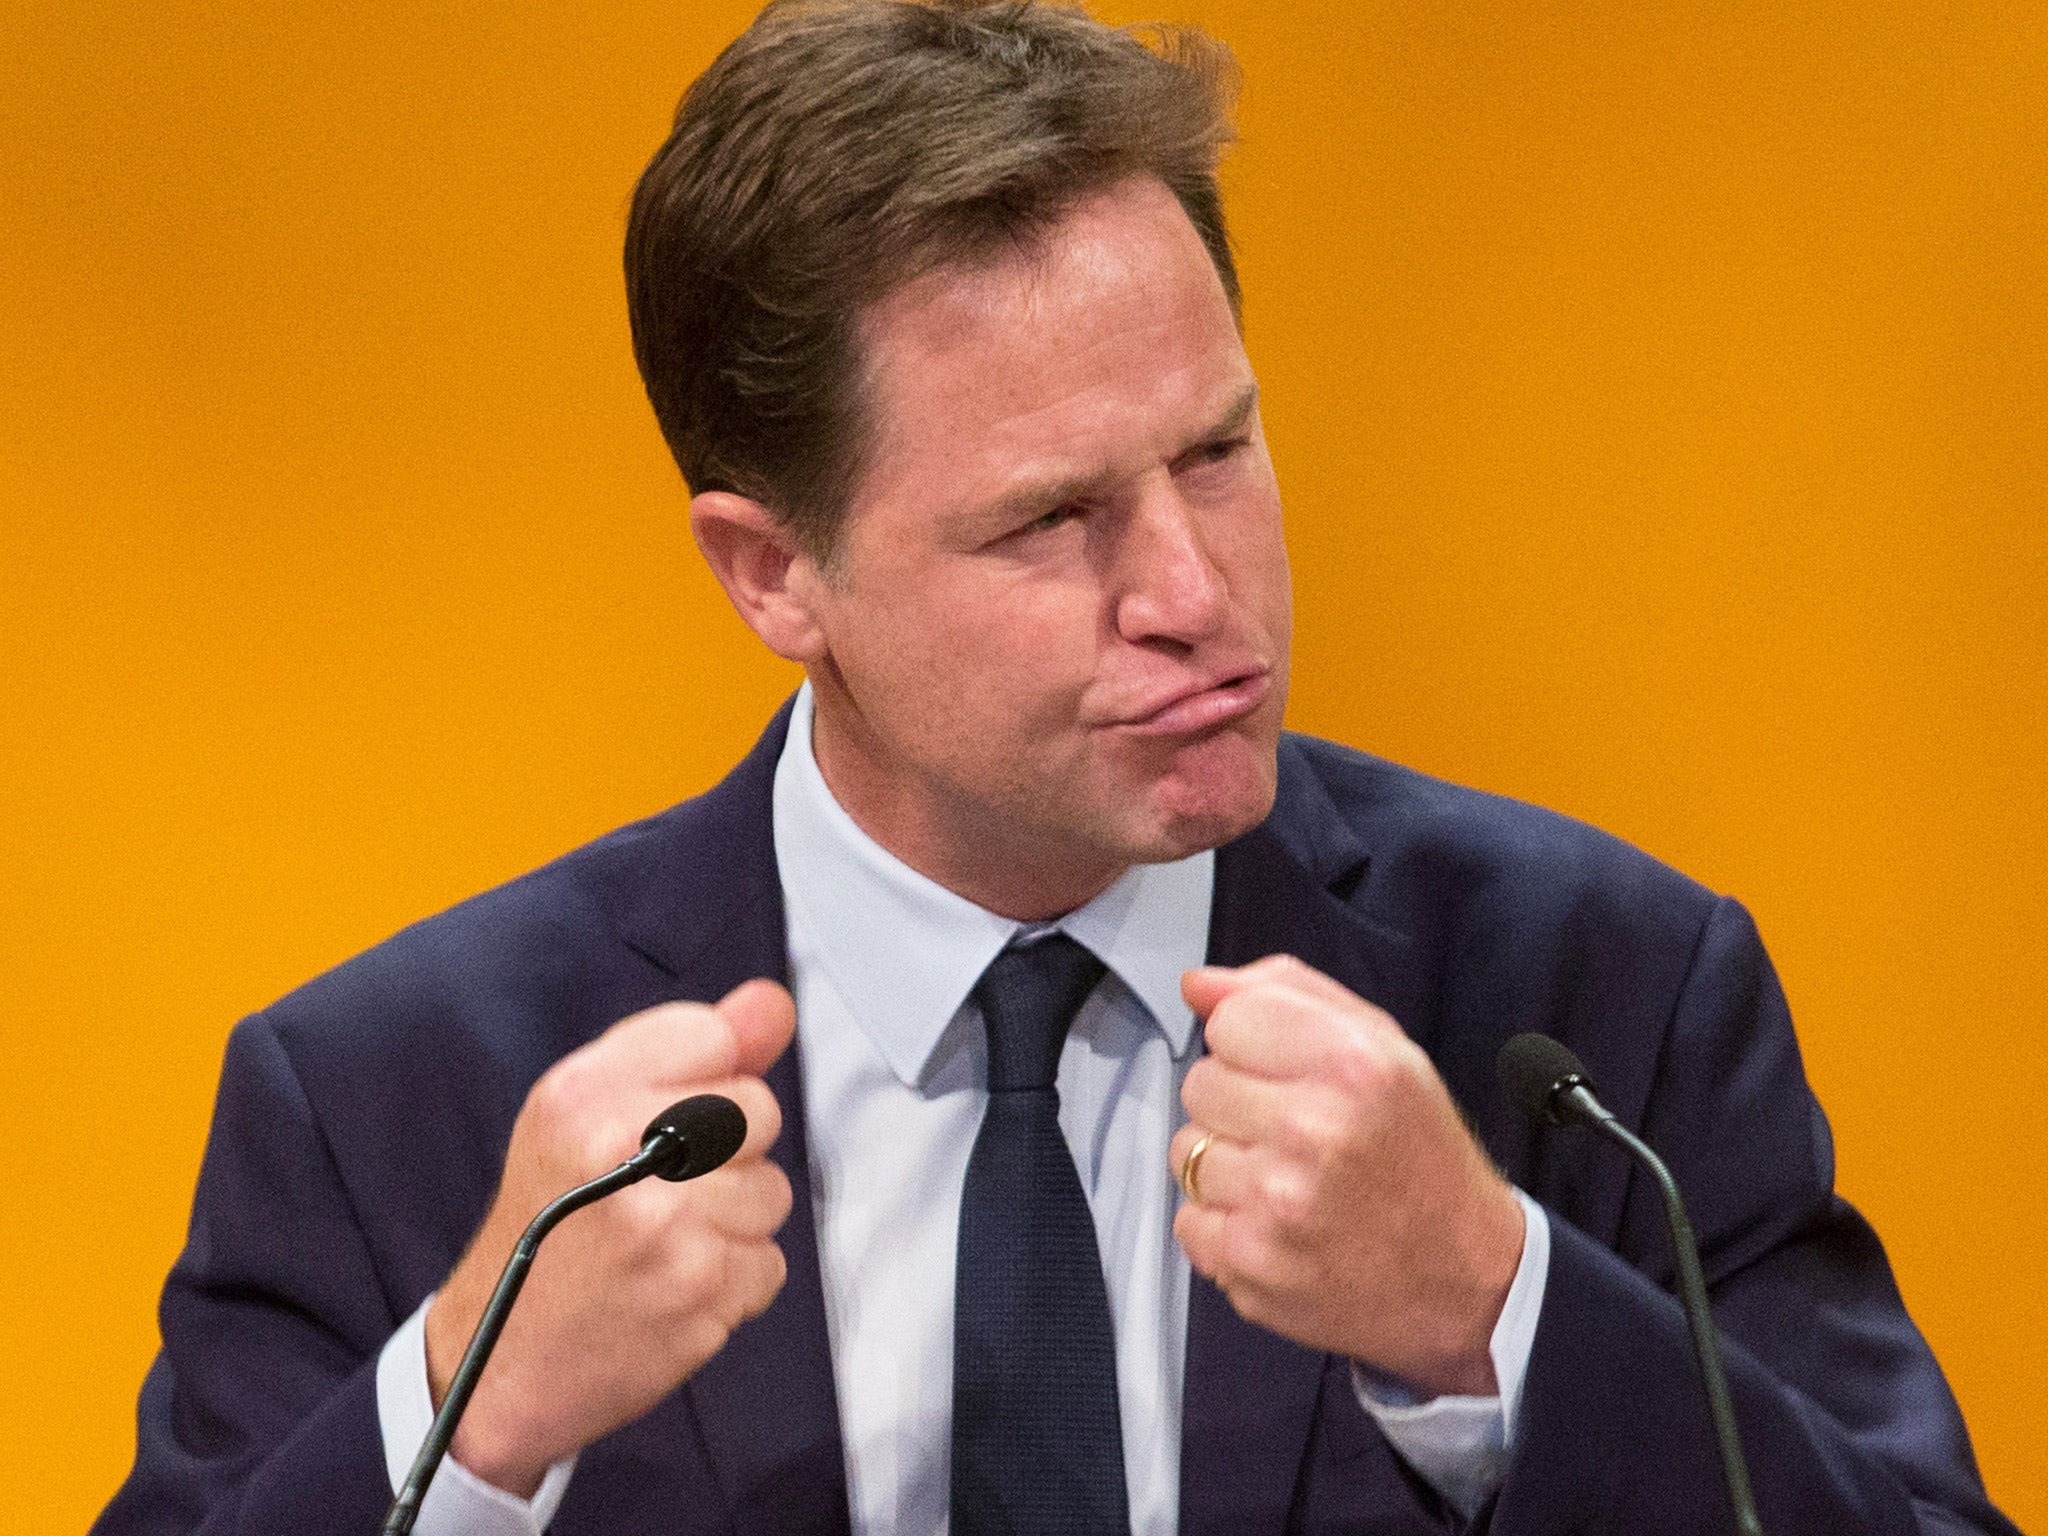 Nick Clegg warns about the danger of following the ‘fax democracy’ of Norway to access trade